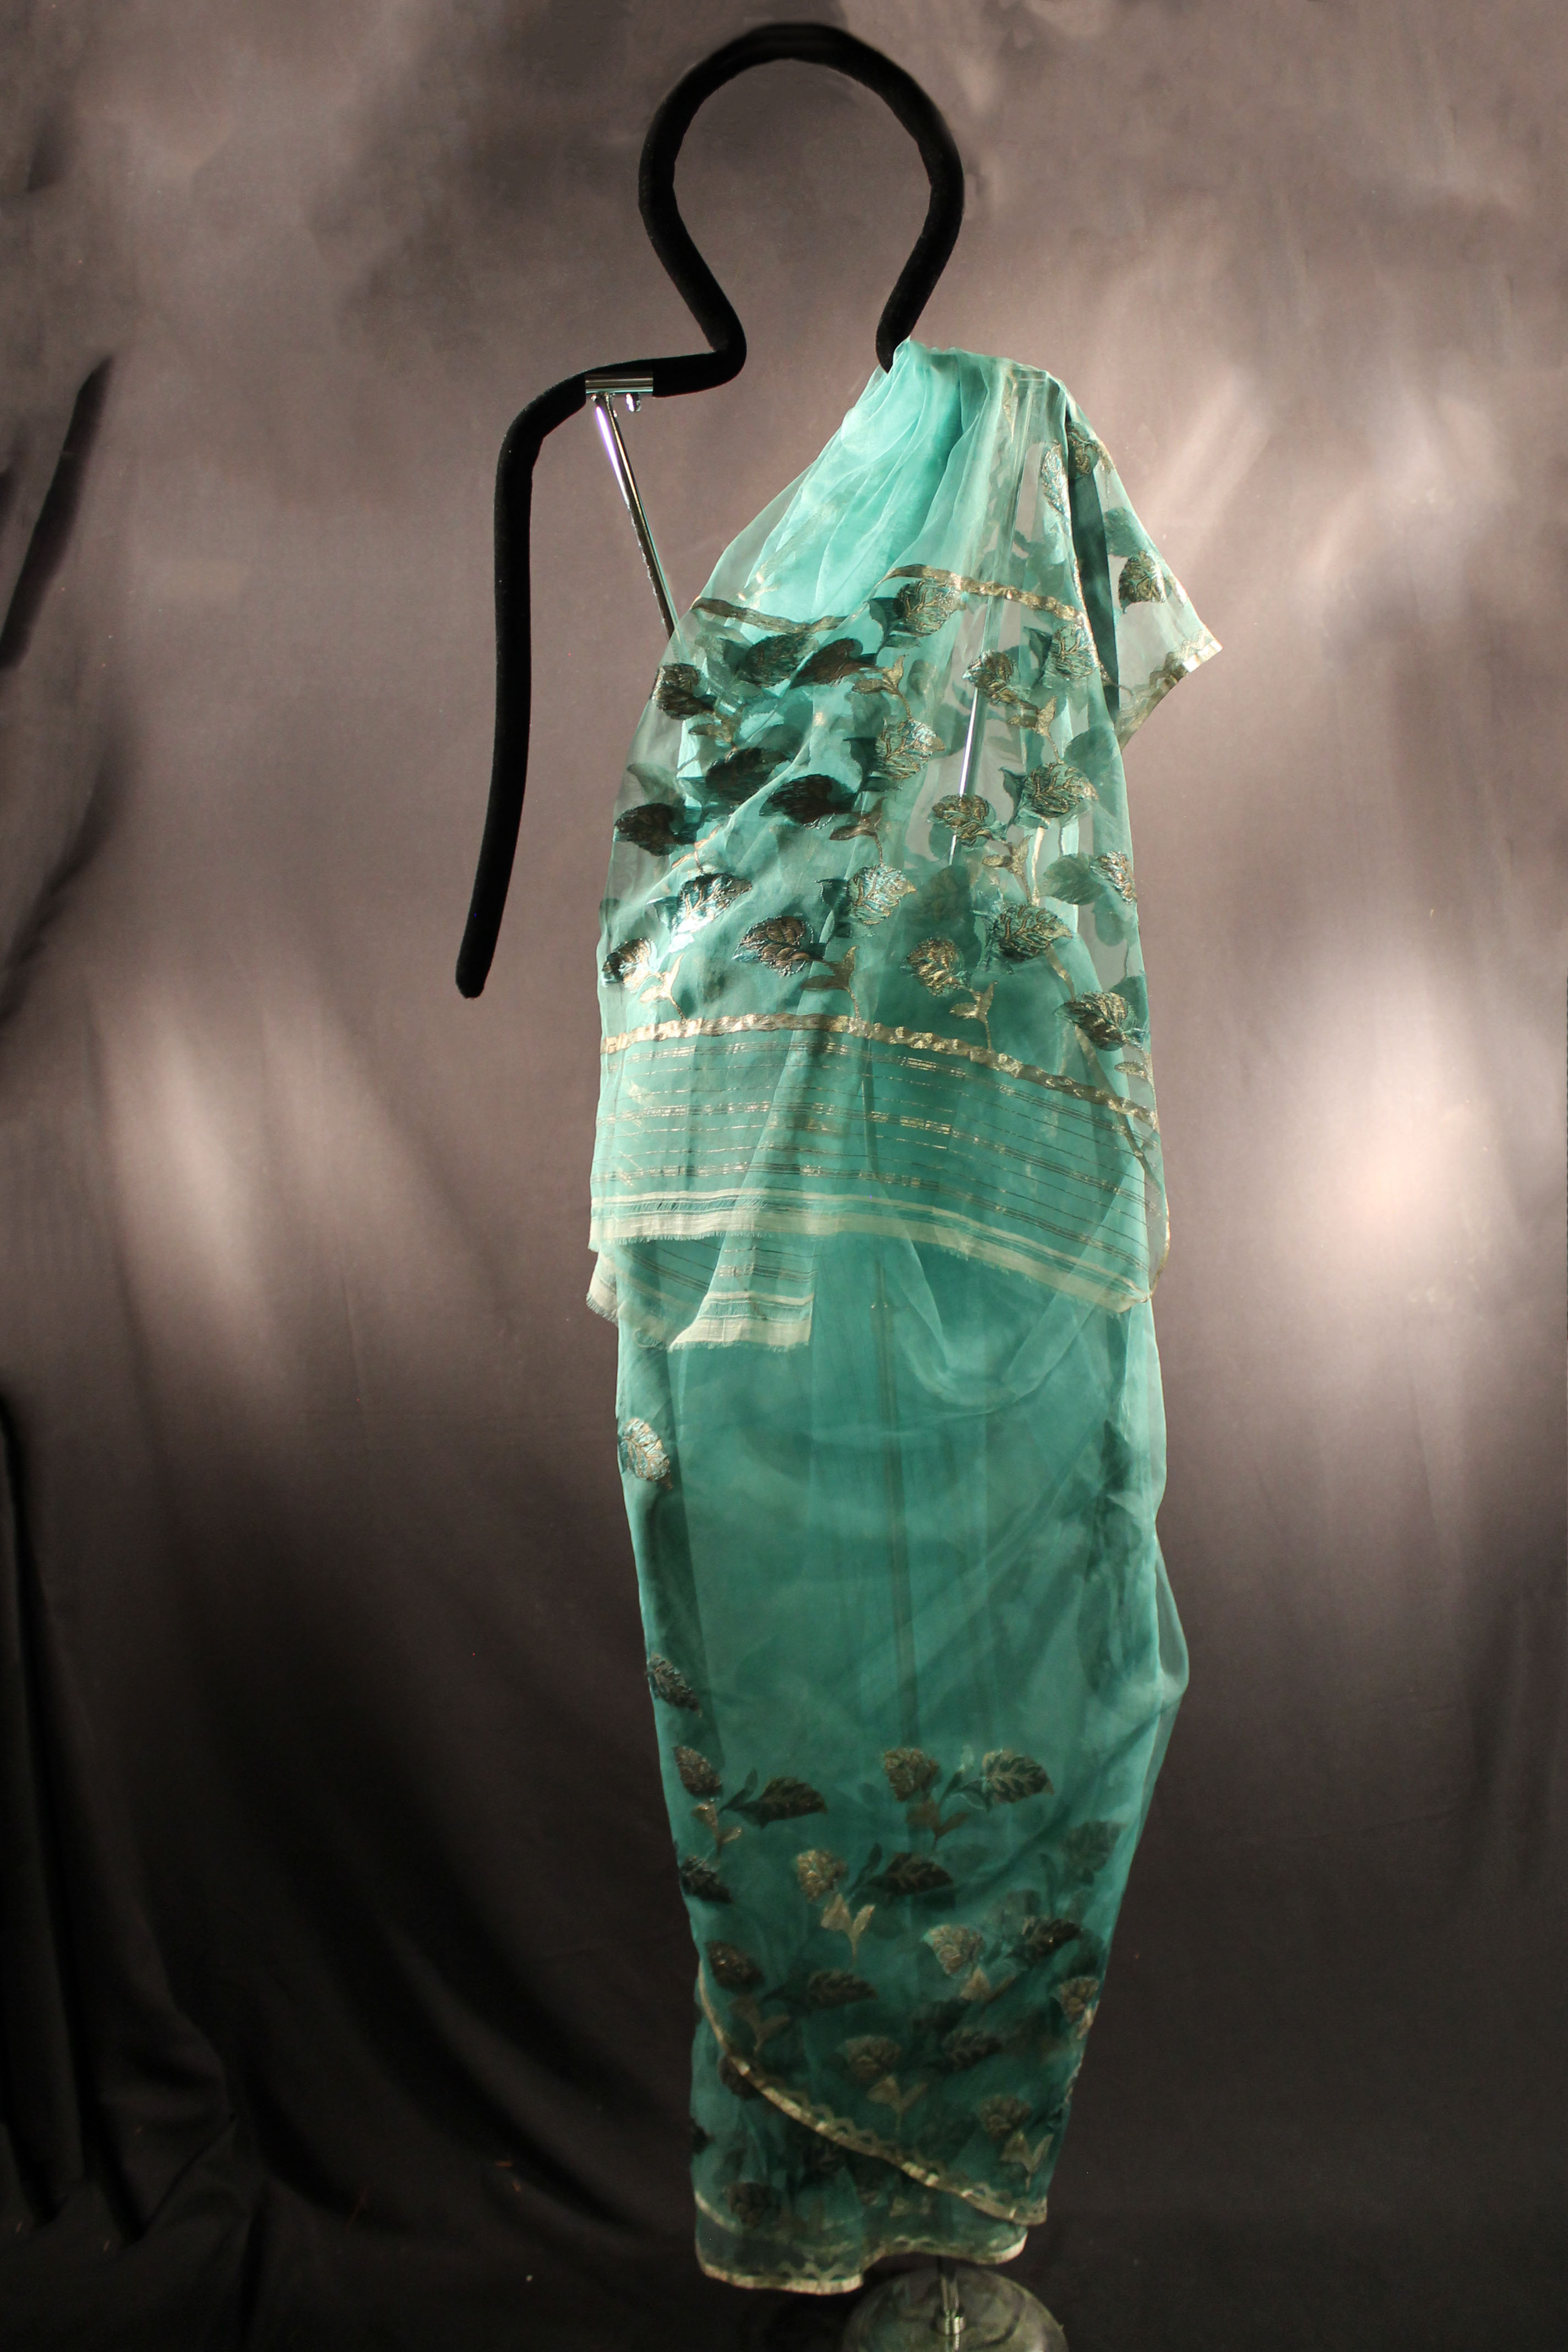 Turquoise cloth sari with edge decorated with silver thread with a zigzag design above it. Also has a leaf pattern design on the body of the garment.